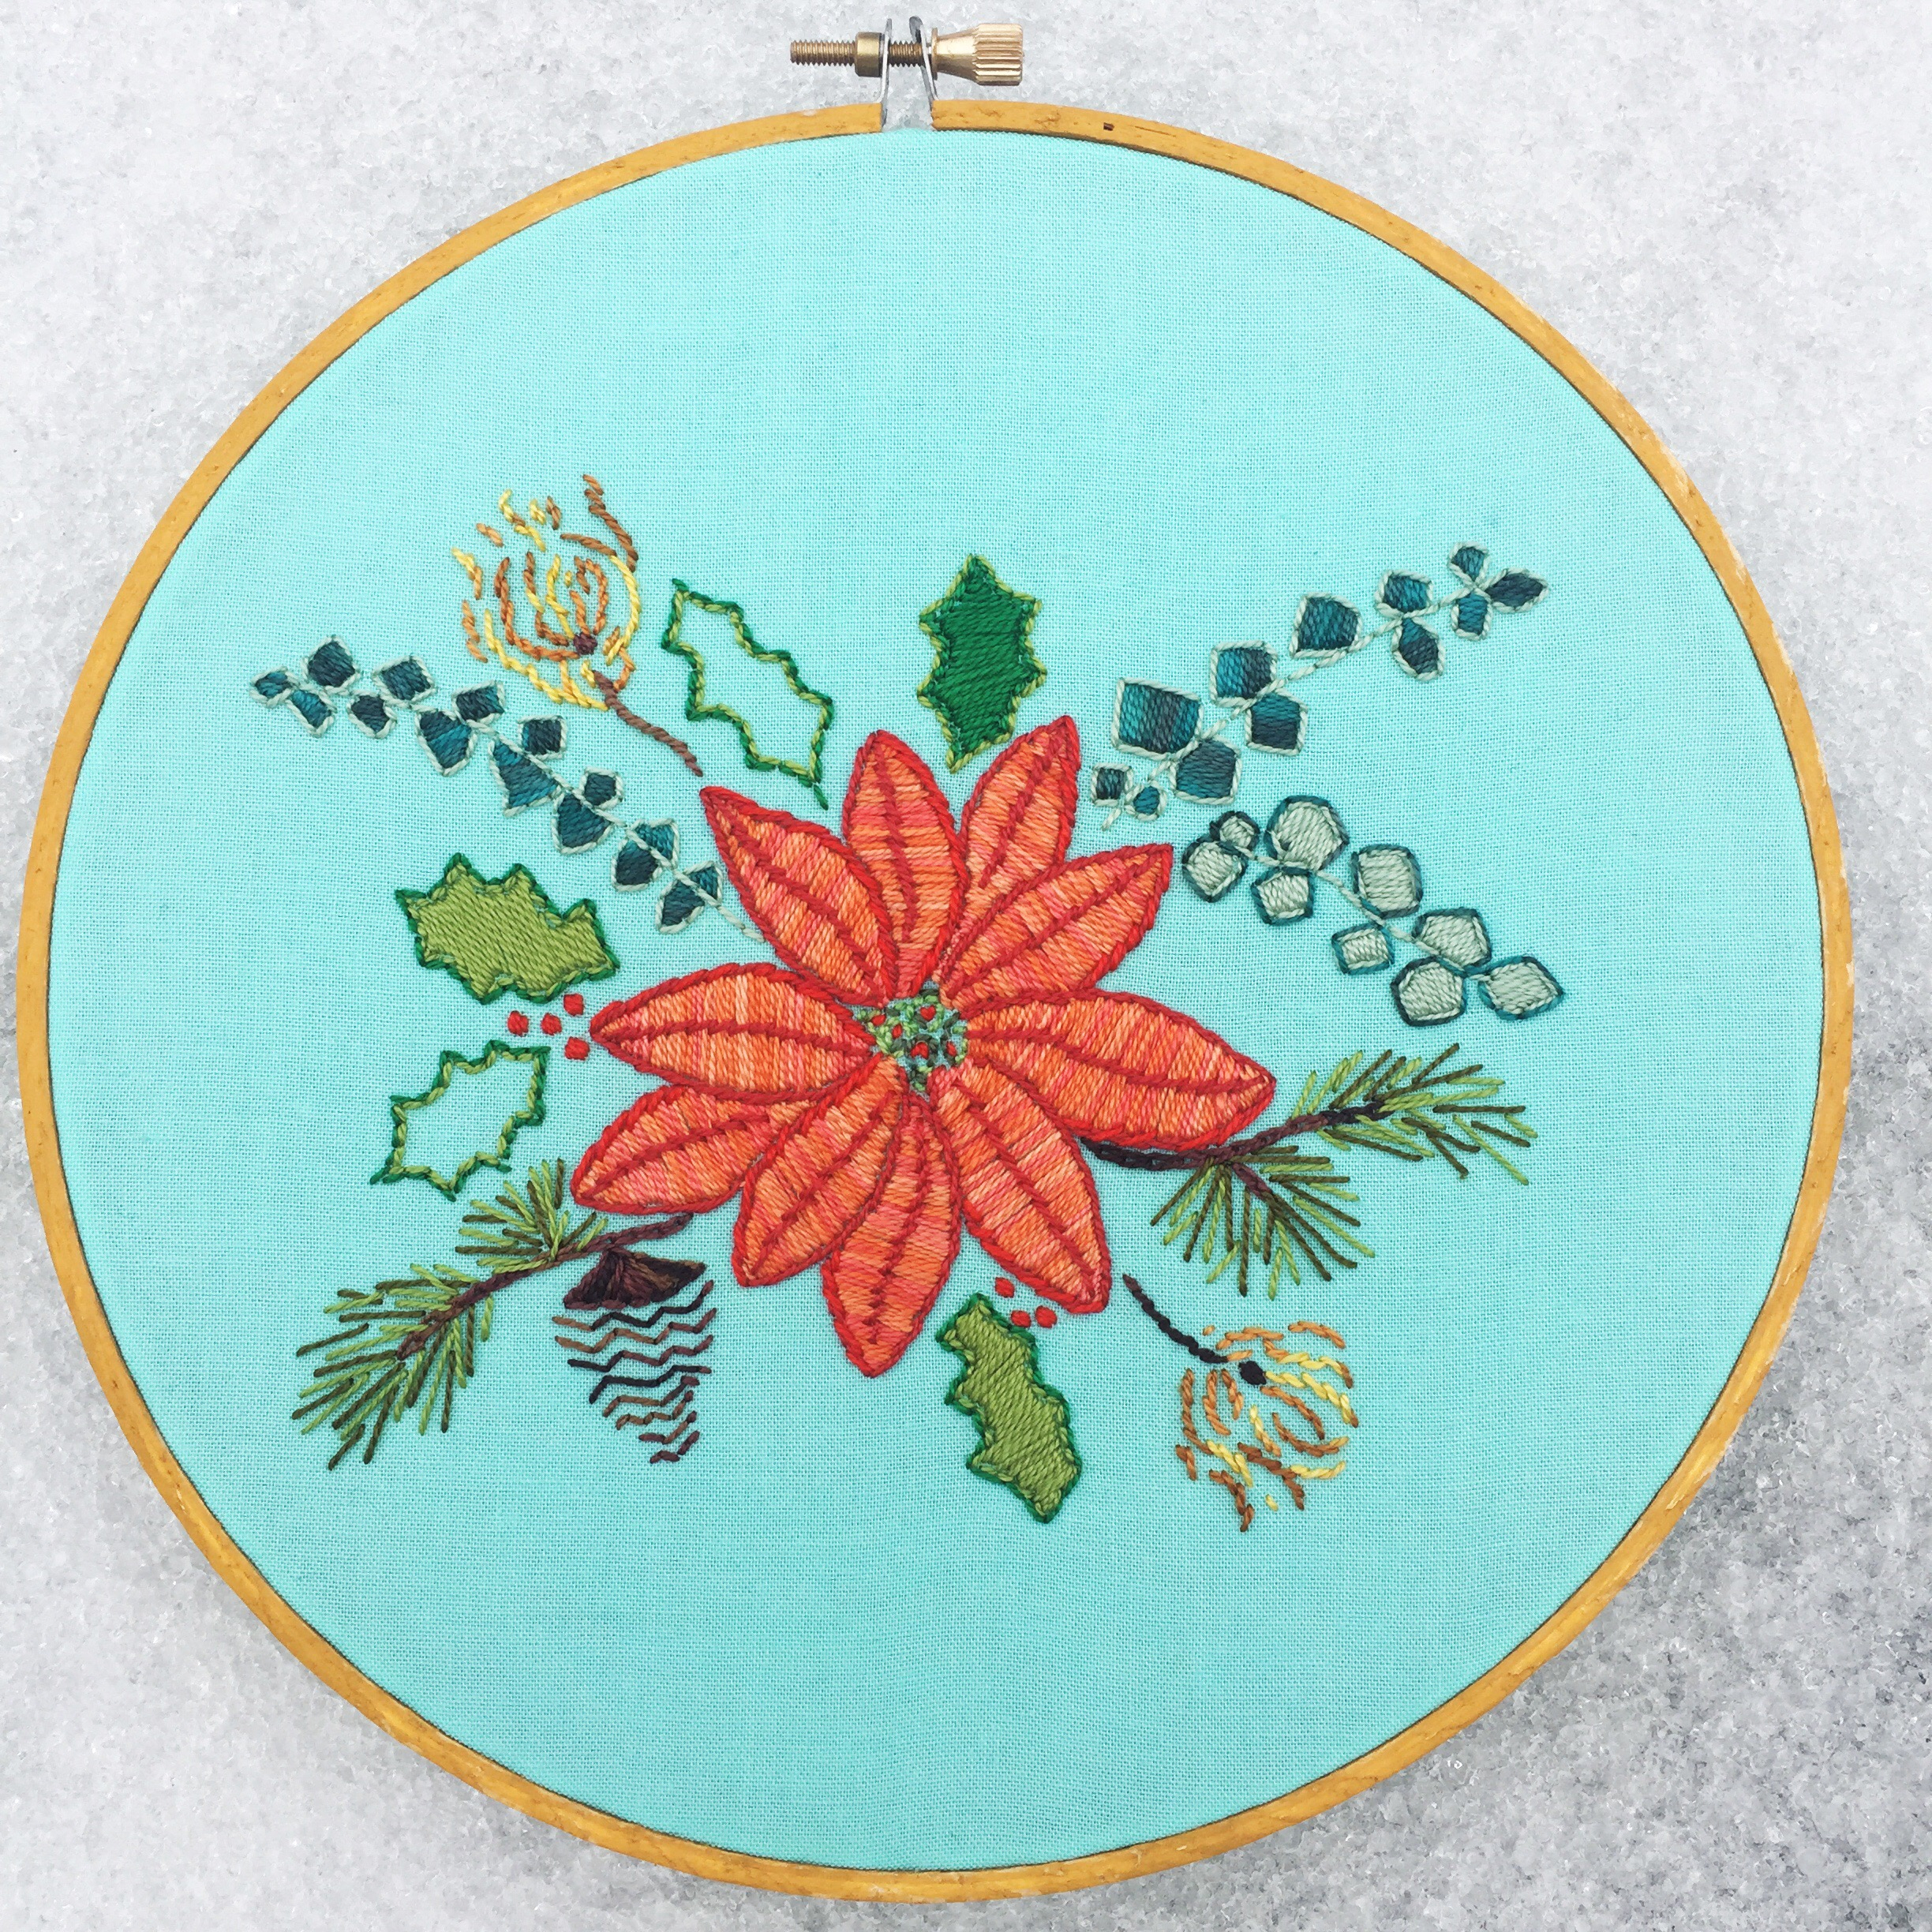 Embroidery Patterns Online Wildboho Embroidery Patterns Wildboho